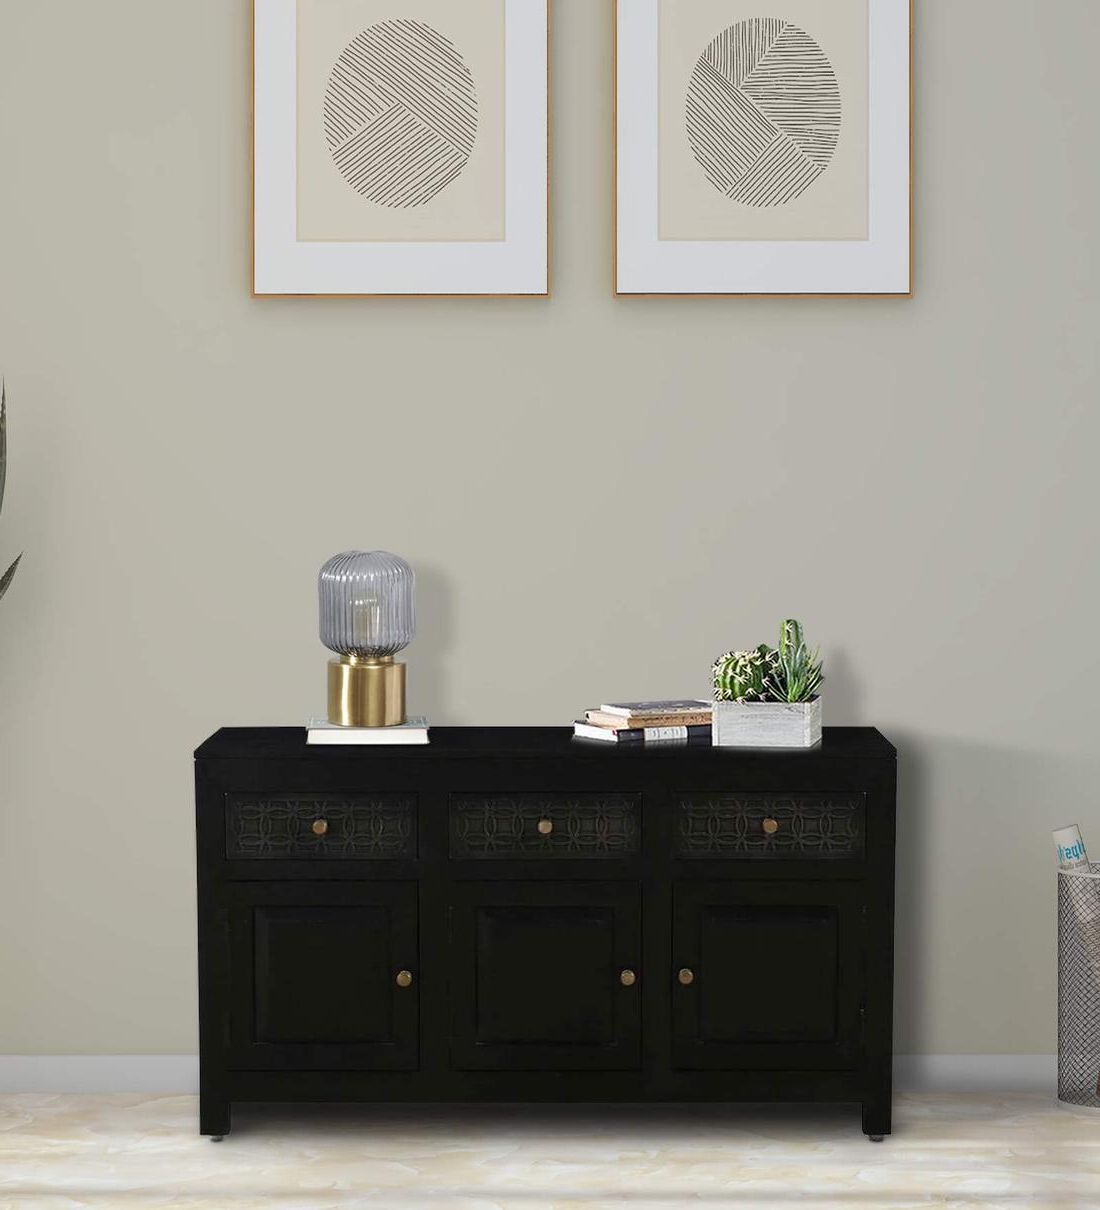 Buy Kawung Solid Wood Sideboard In Scratch Resistant Ebony Finish With 3  Doors At 10% Offwoodsworth From Pepperfry | Pepperfry Intended For Sideboards With Breathable Mesh Doors (View 10 of 20)